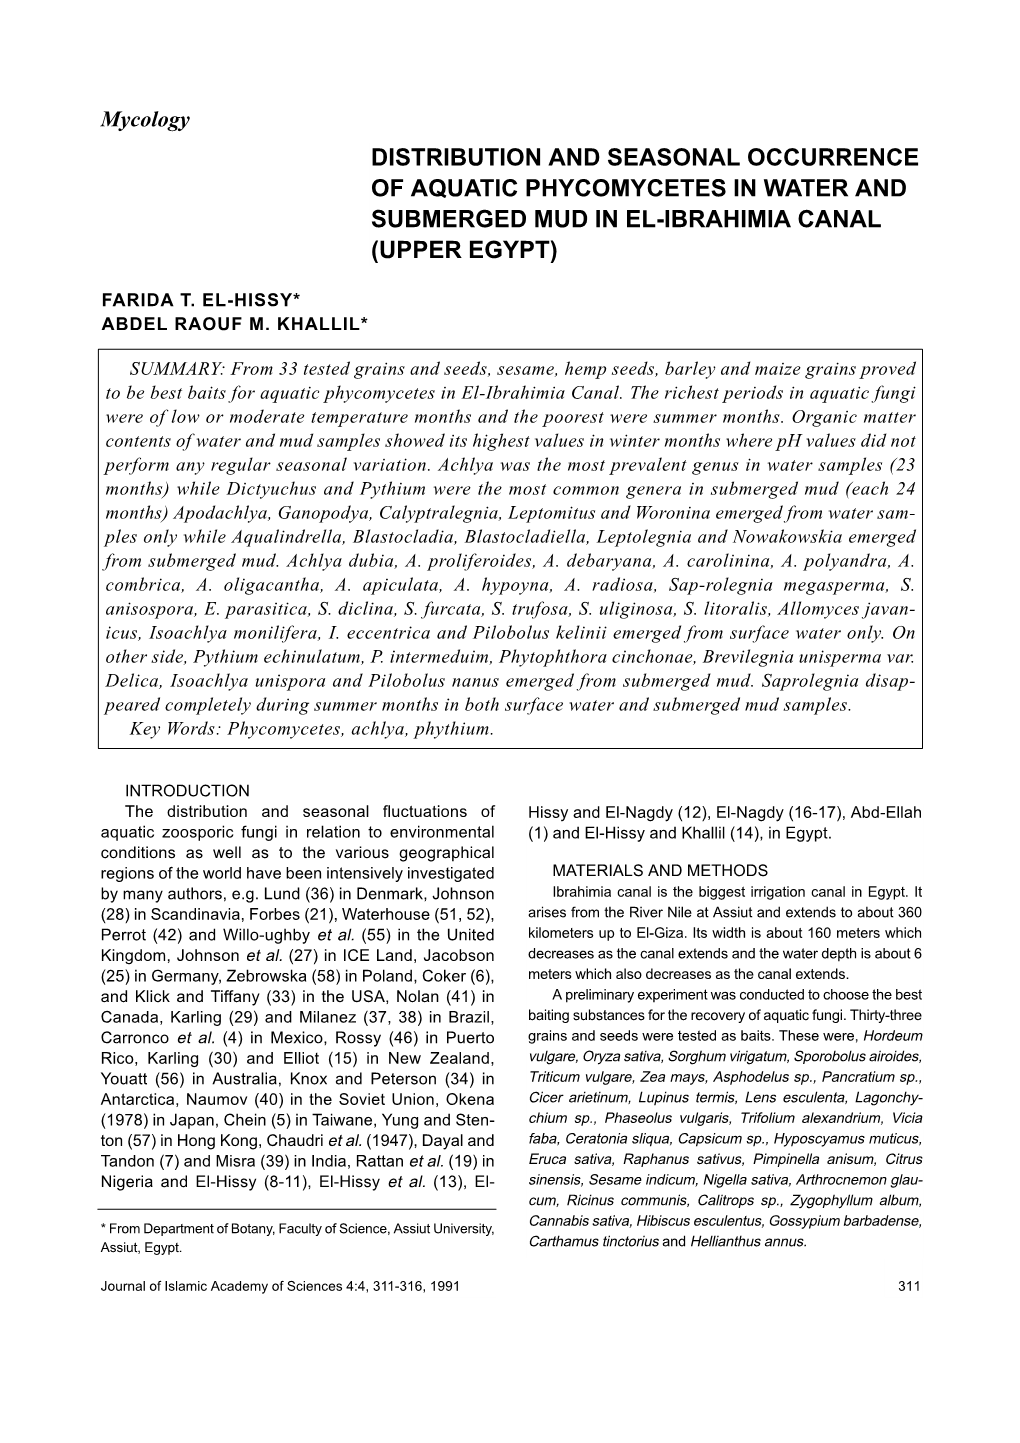 Distribution and Seasonal Occurrence of Aquatic Phycomycetes in Water and Submerged Mud in El-Ibrahimia Canal (Upper Egypt)